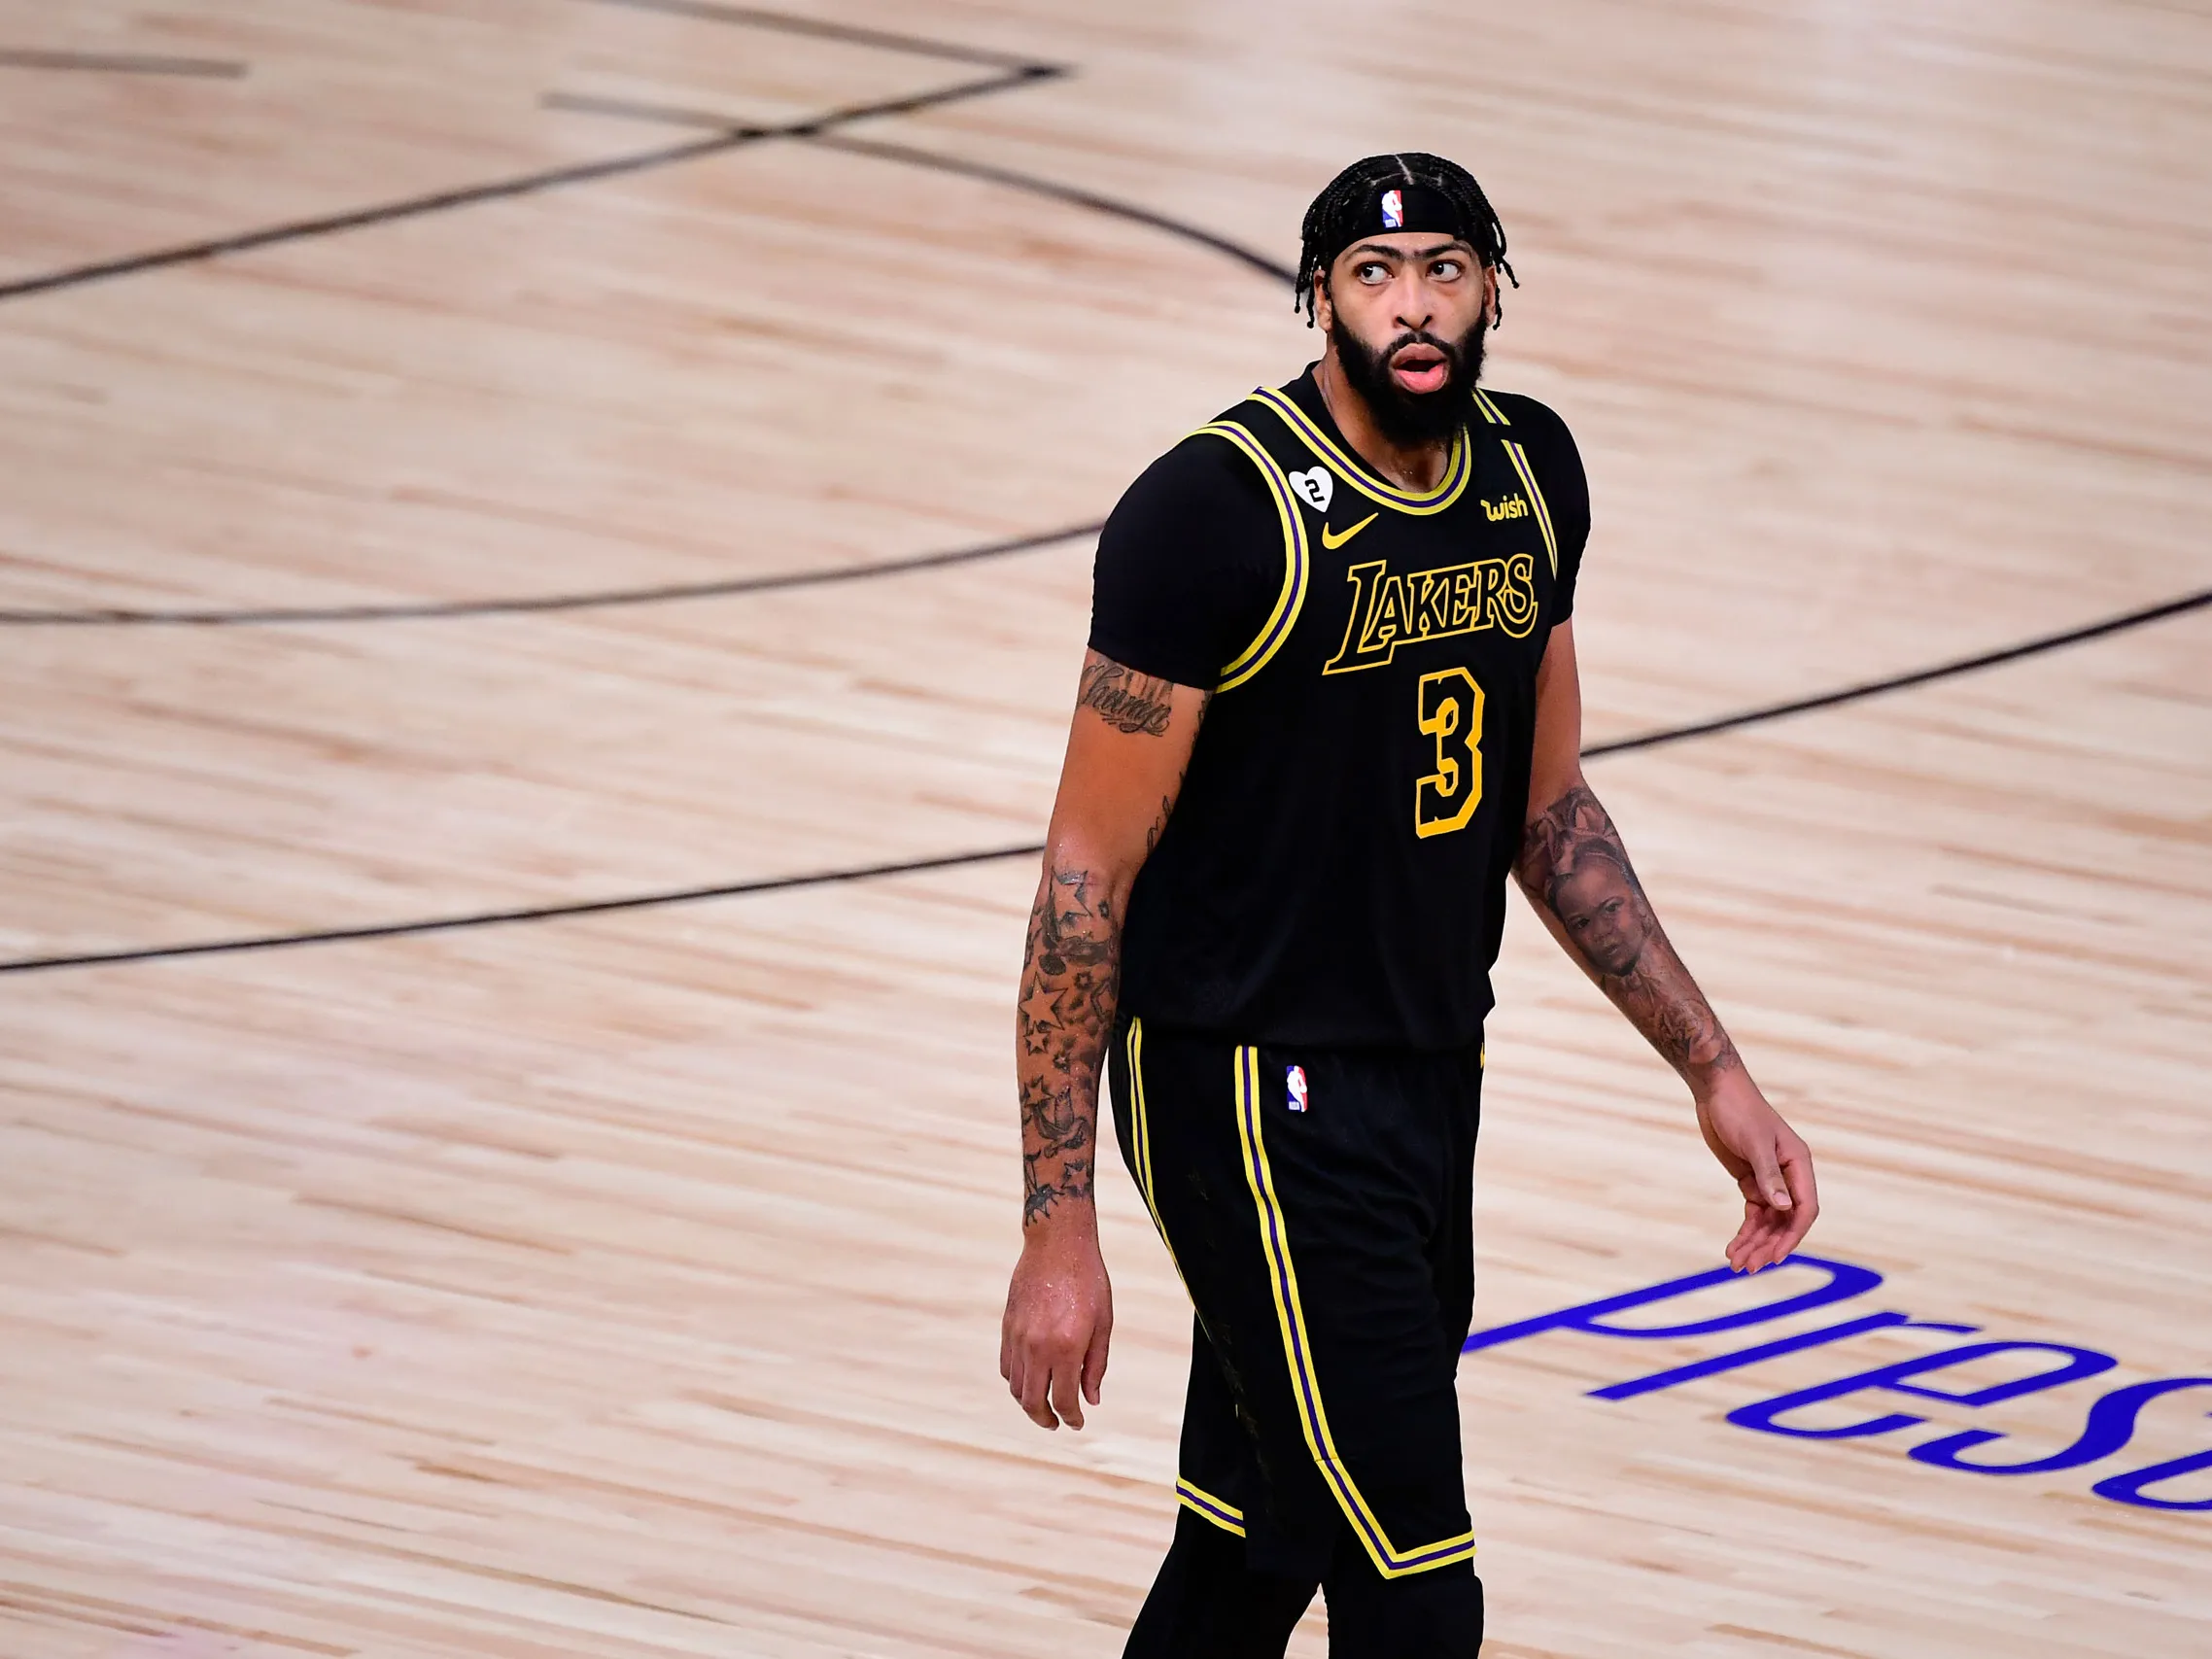 Anthony Davis Reflects on Lakers' Current Struggles and Looks Ahead Without Relying on Trade Moves